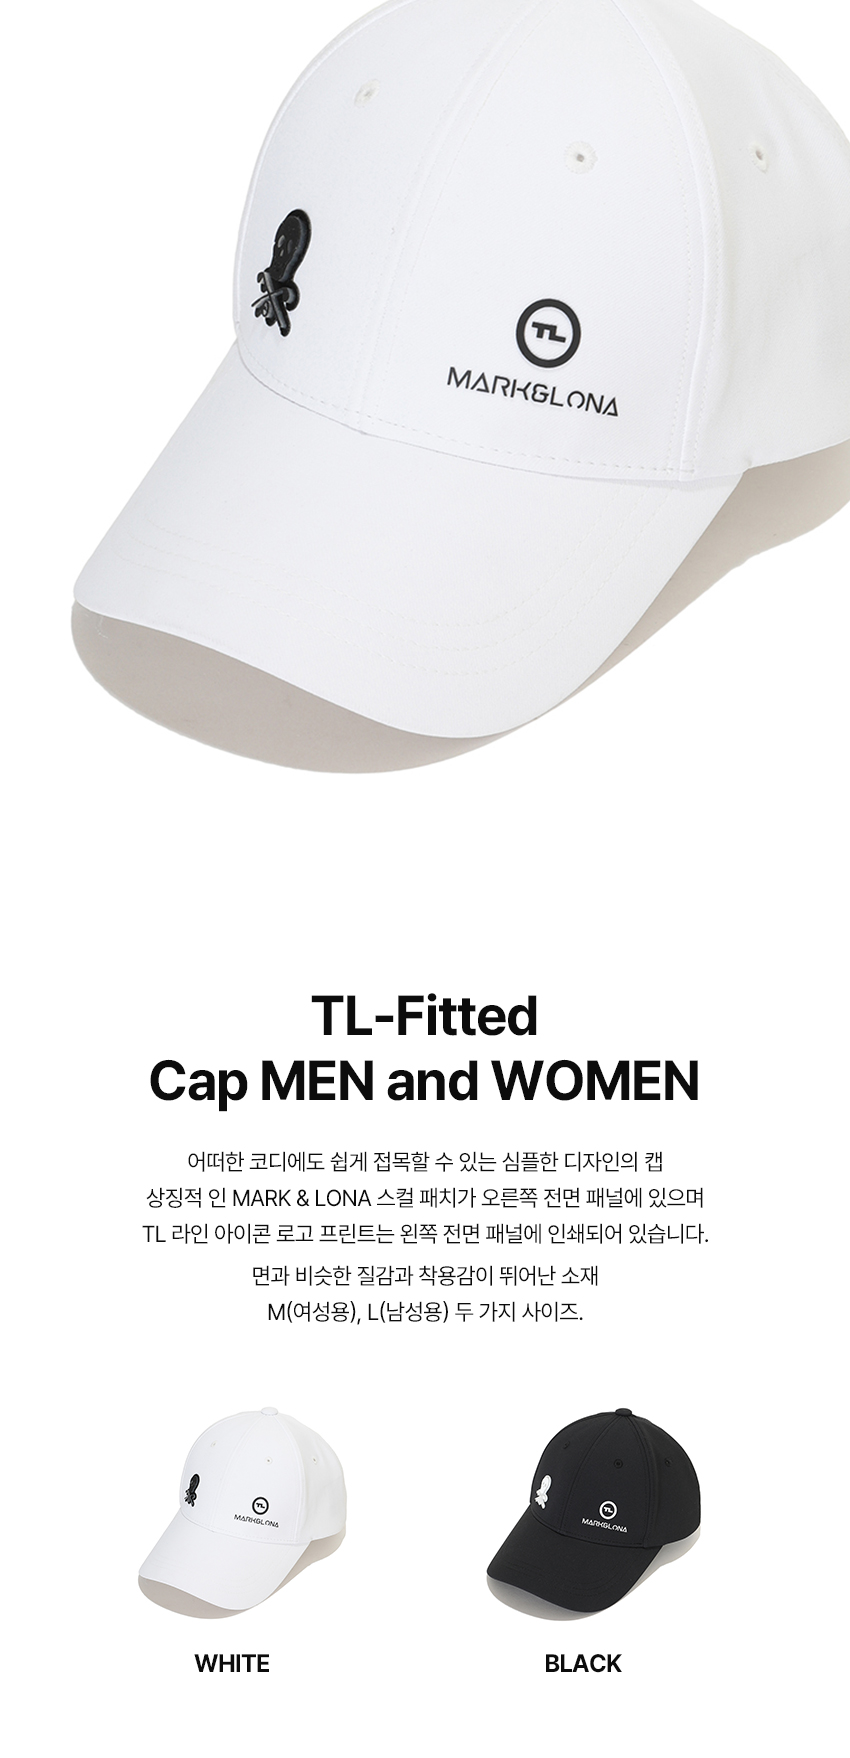 20.TL_Fitted_Cap_MEN_and_WOMEN_01.jpg